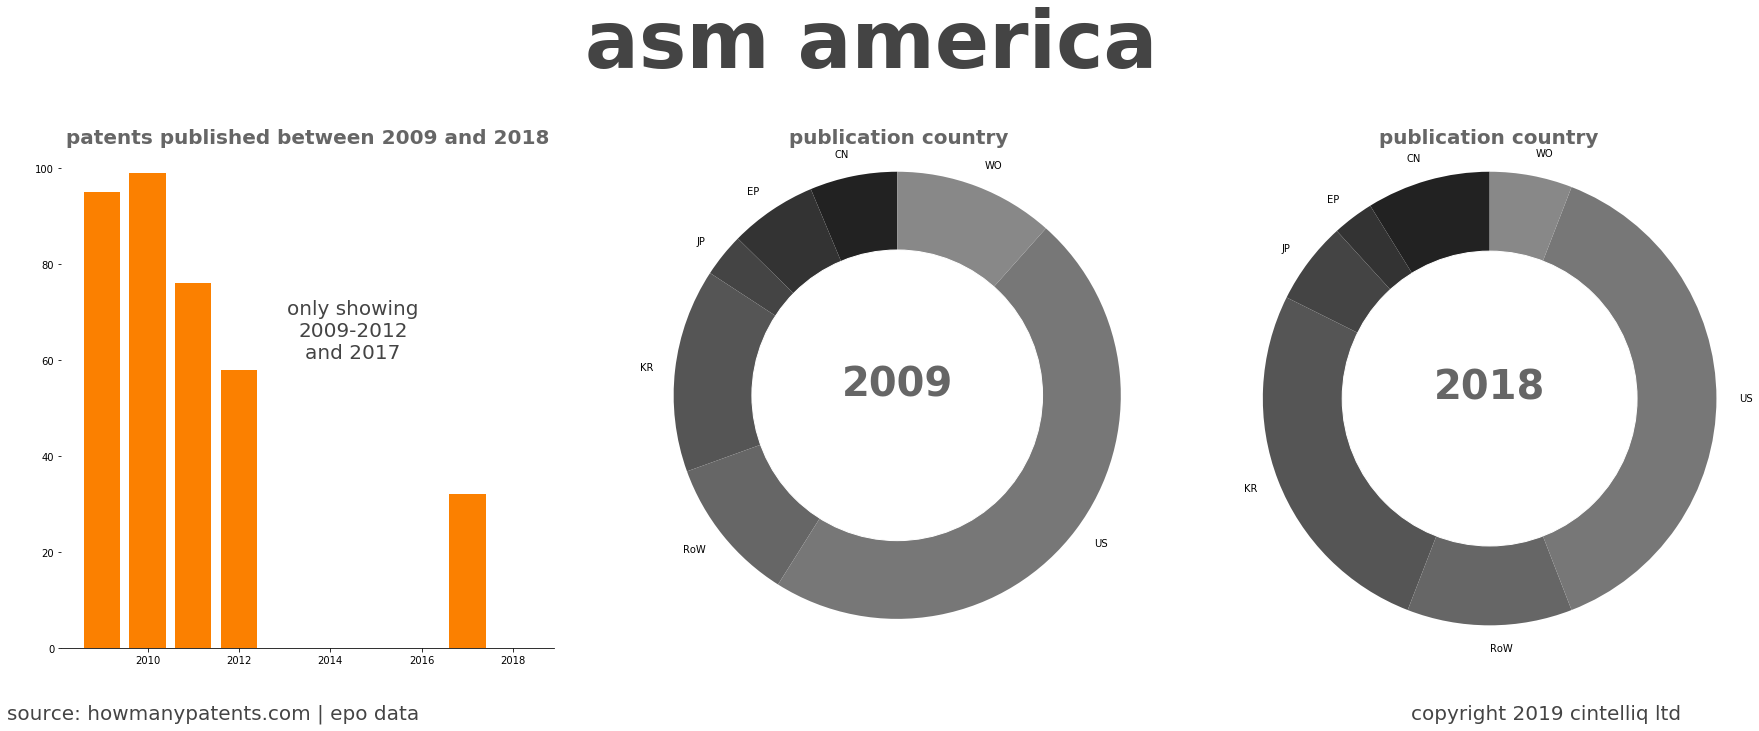 summary of patents for Asm America